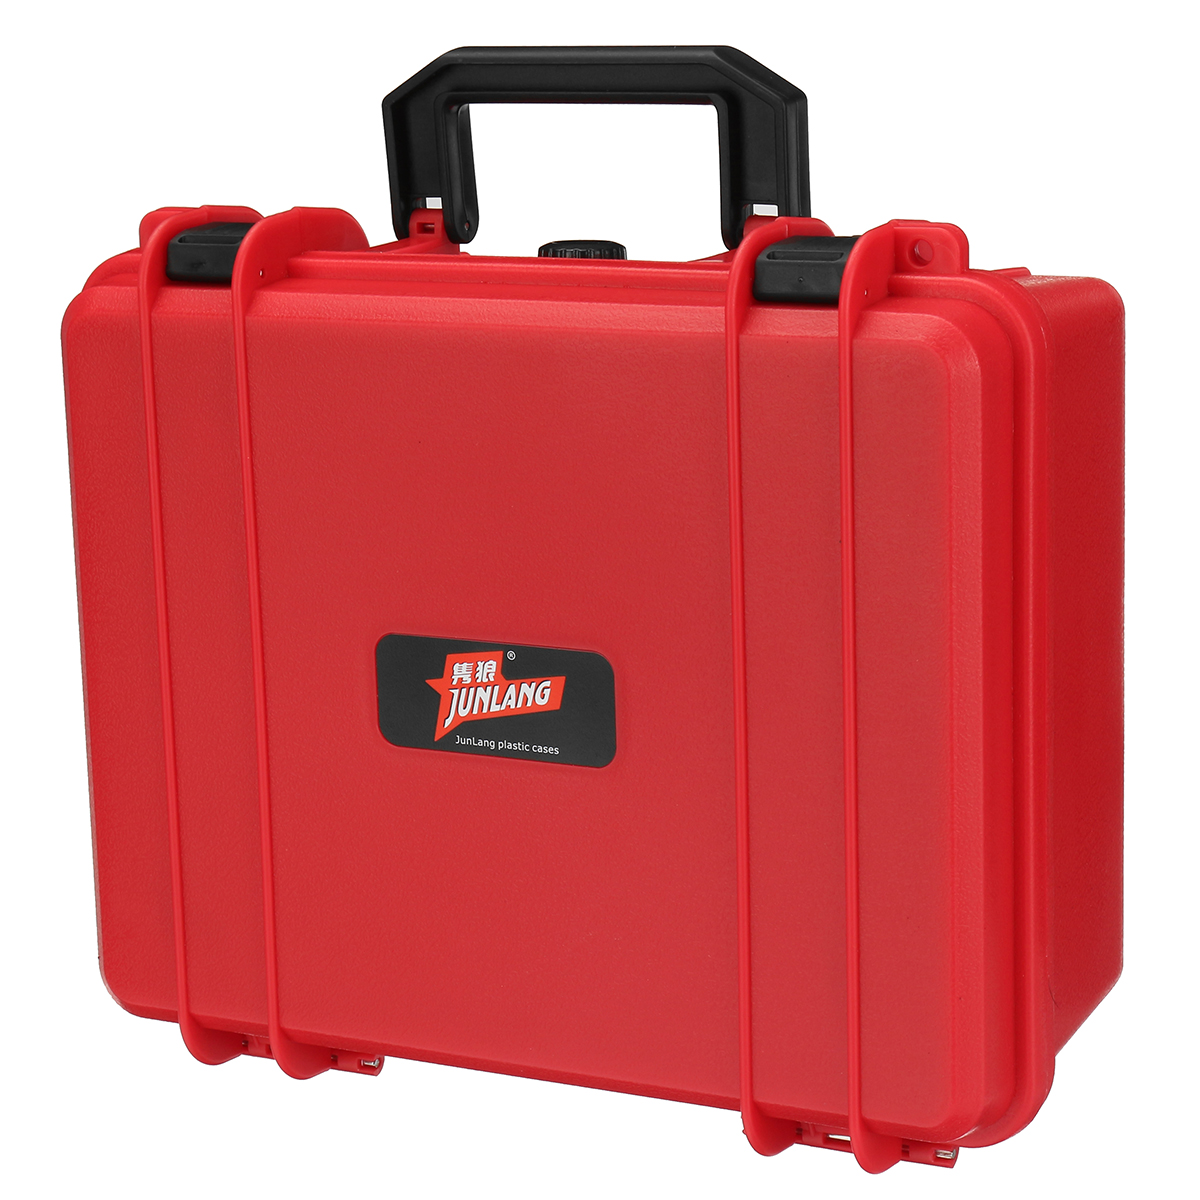 Find 1PCS Red/Black/Blue/Yellow Plastic Tool Box Waterproof Tool Box Anti shock Protection Safety Box for Sale on Gipsybee.com with cryptocurrencies